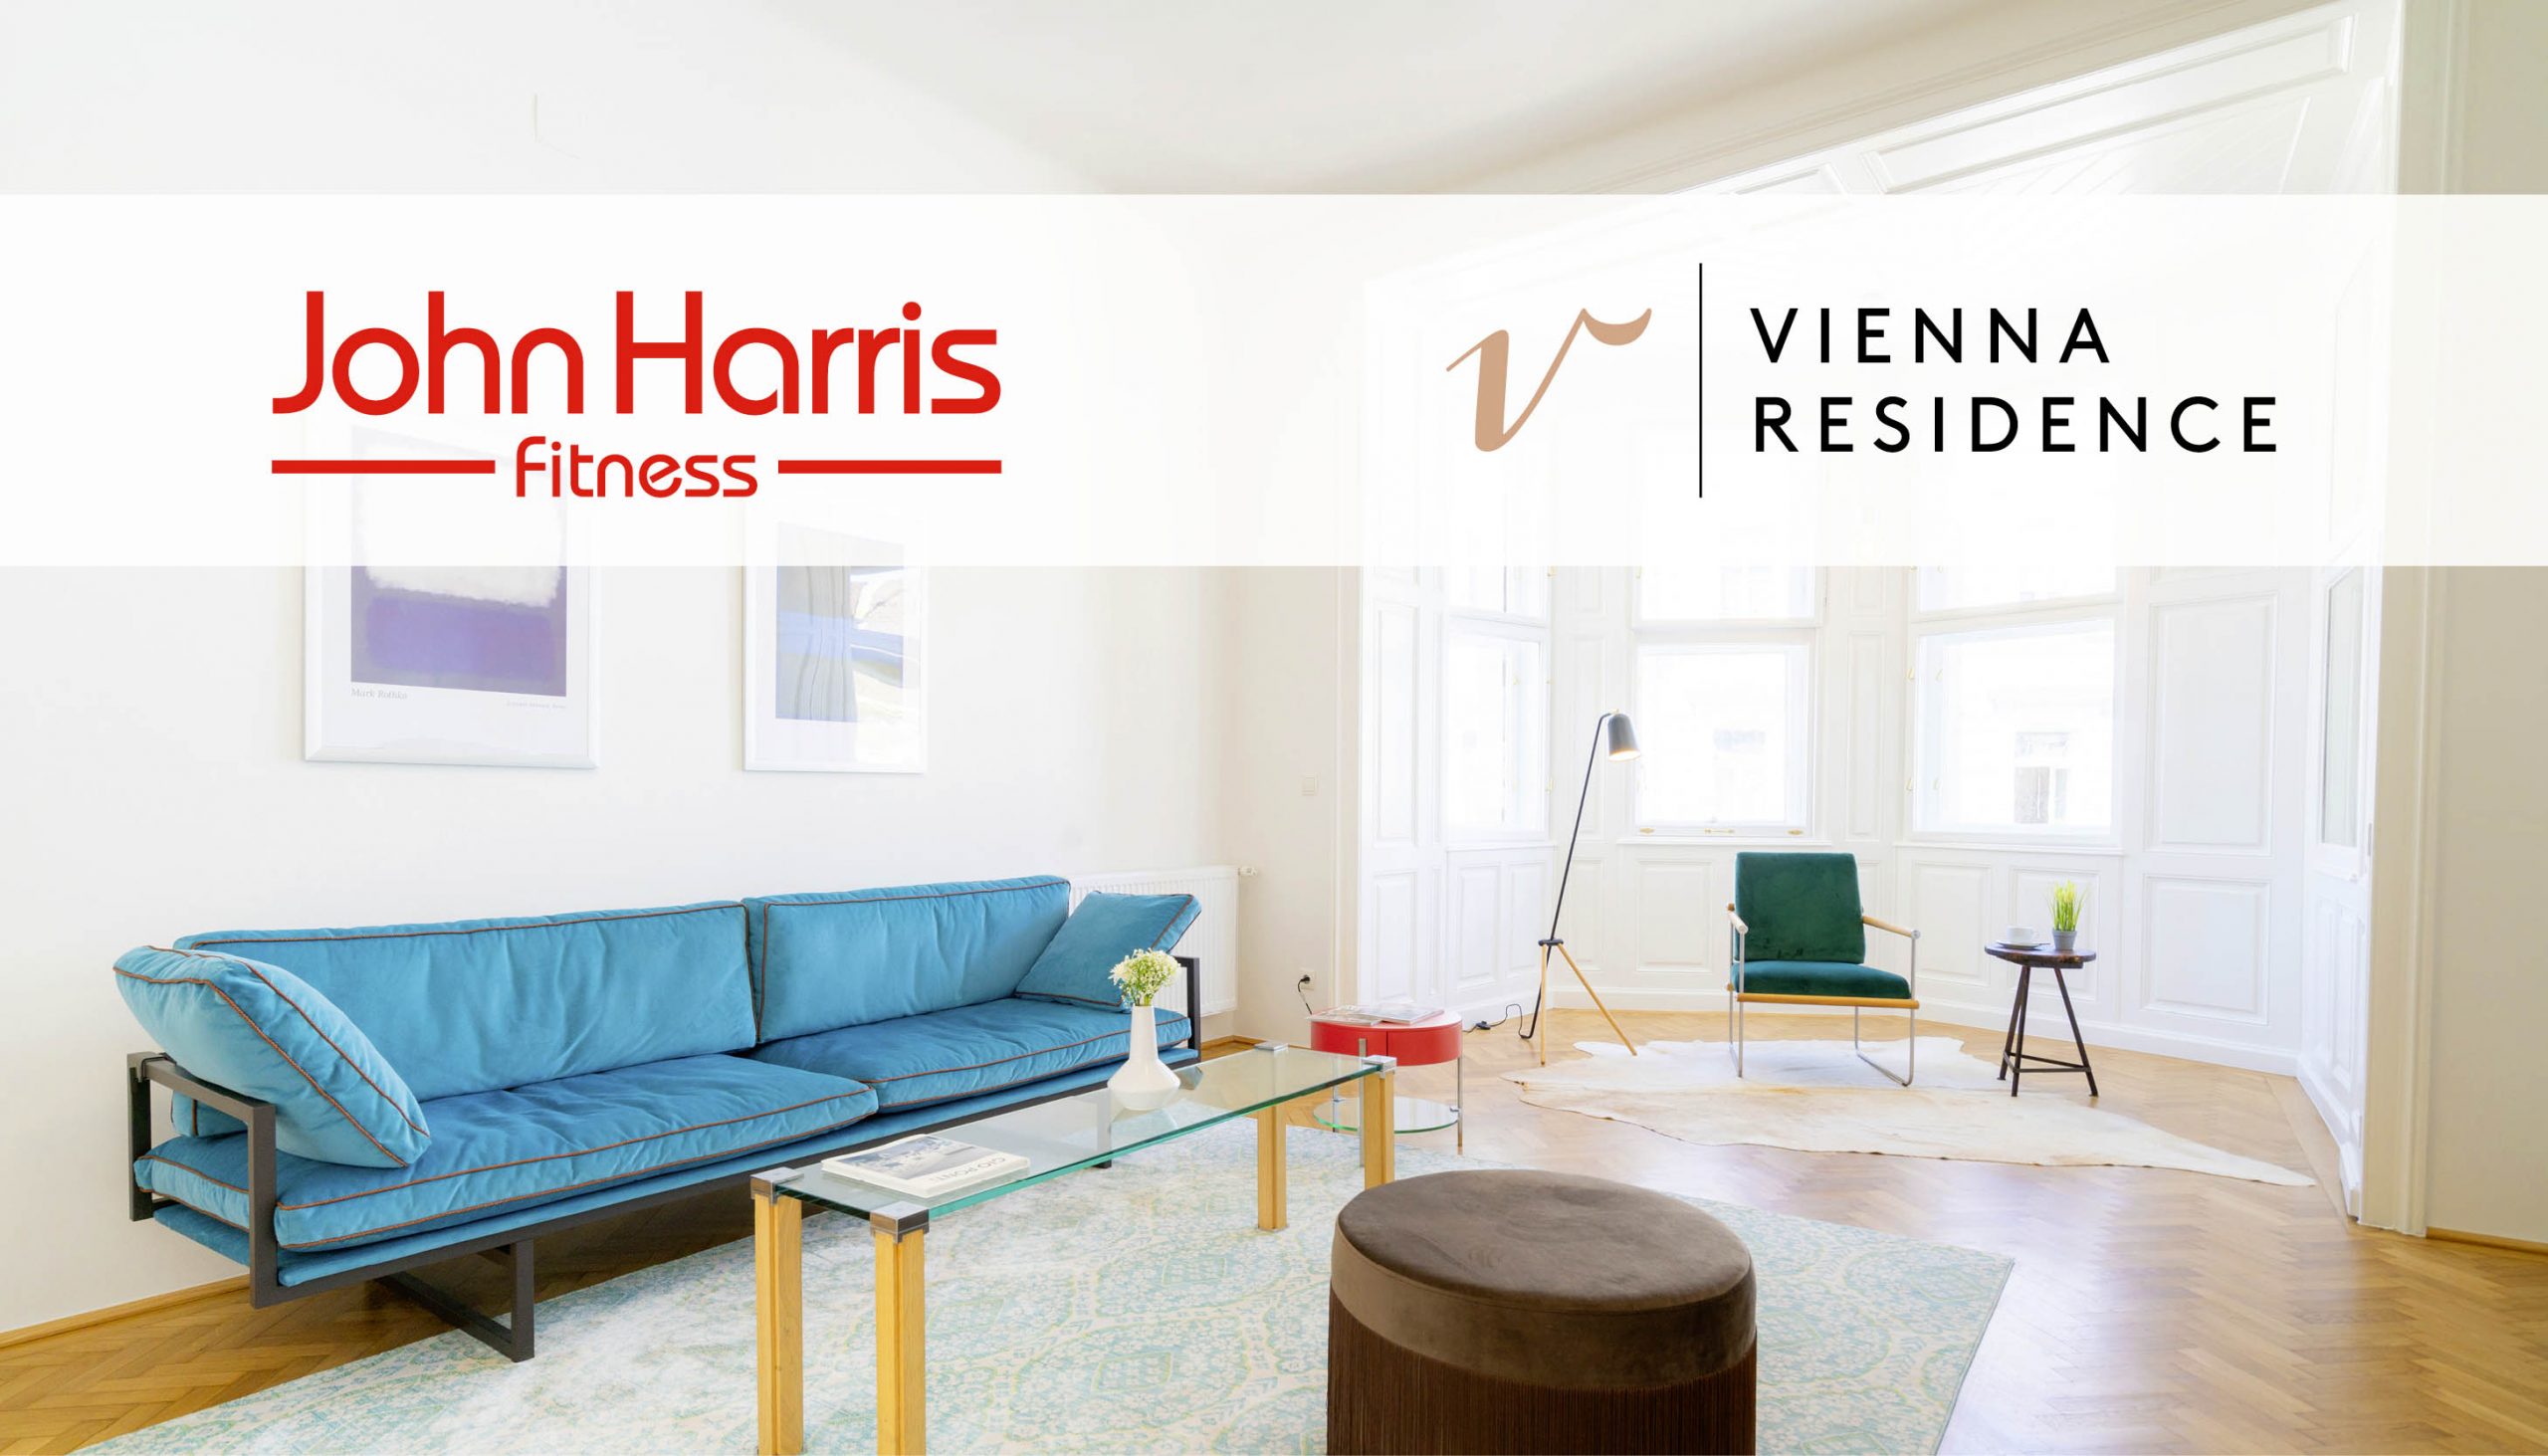 First-class fitness experience with John Harris and Vienna Residence